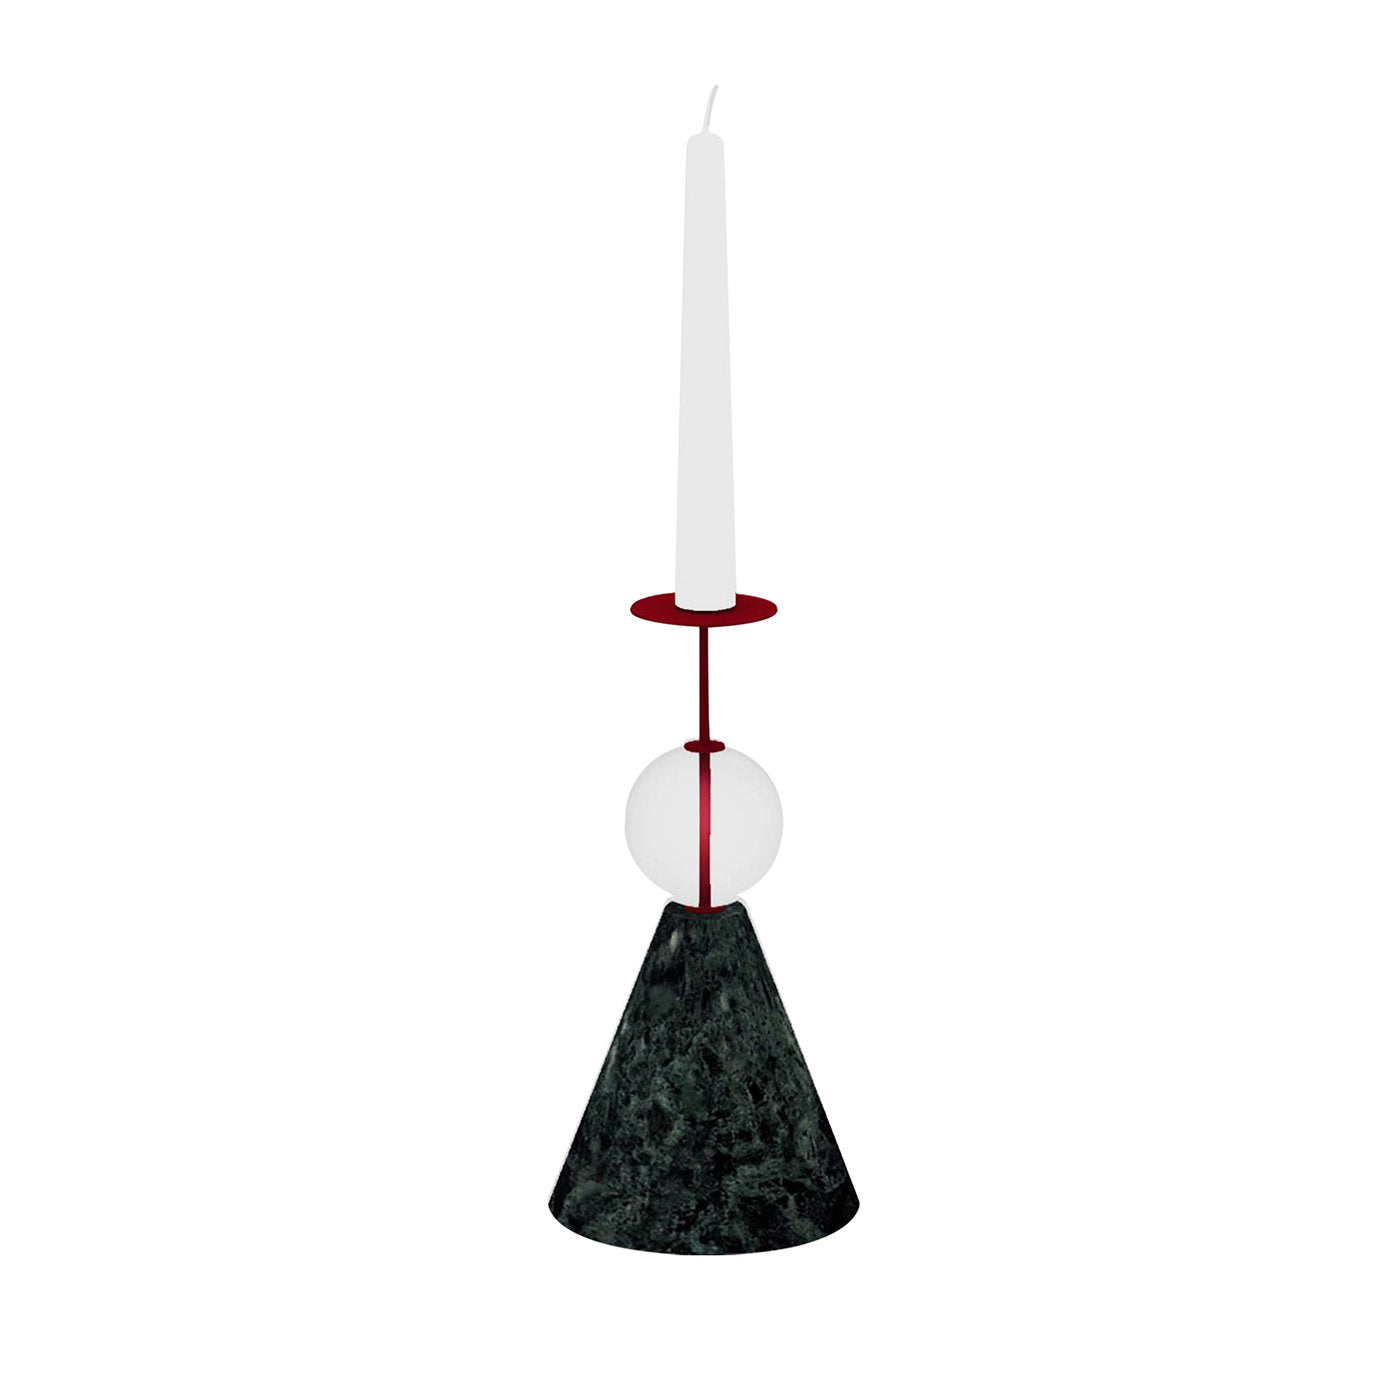 Raccontami Green Guatemala, Red and Transparent Candle Holder - Main view